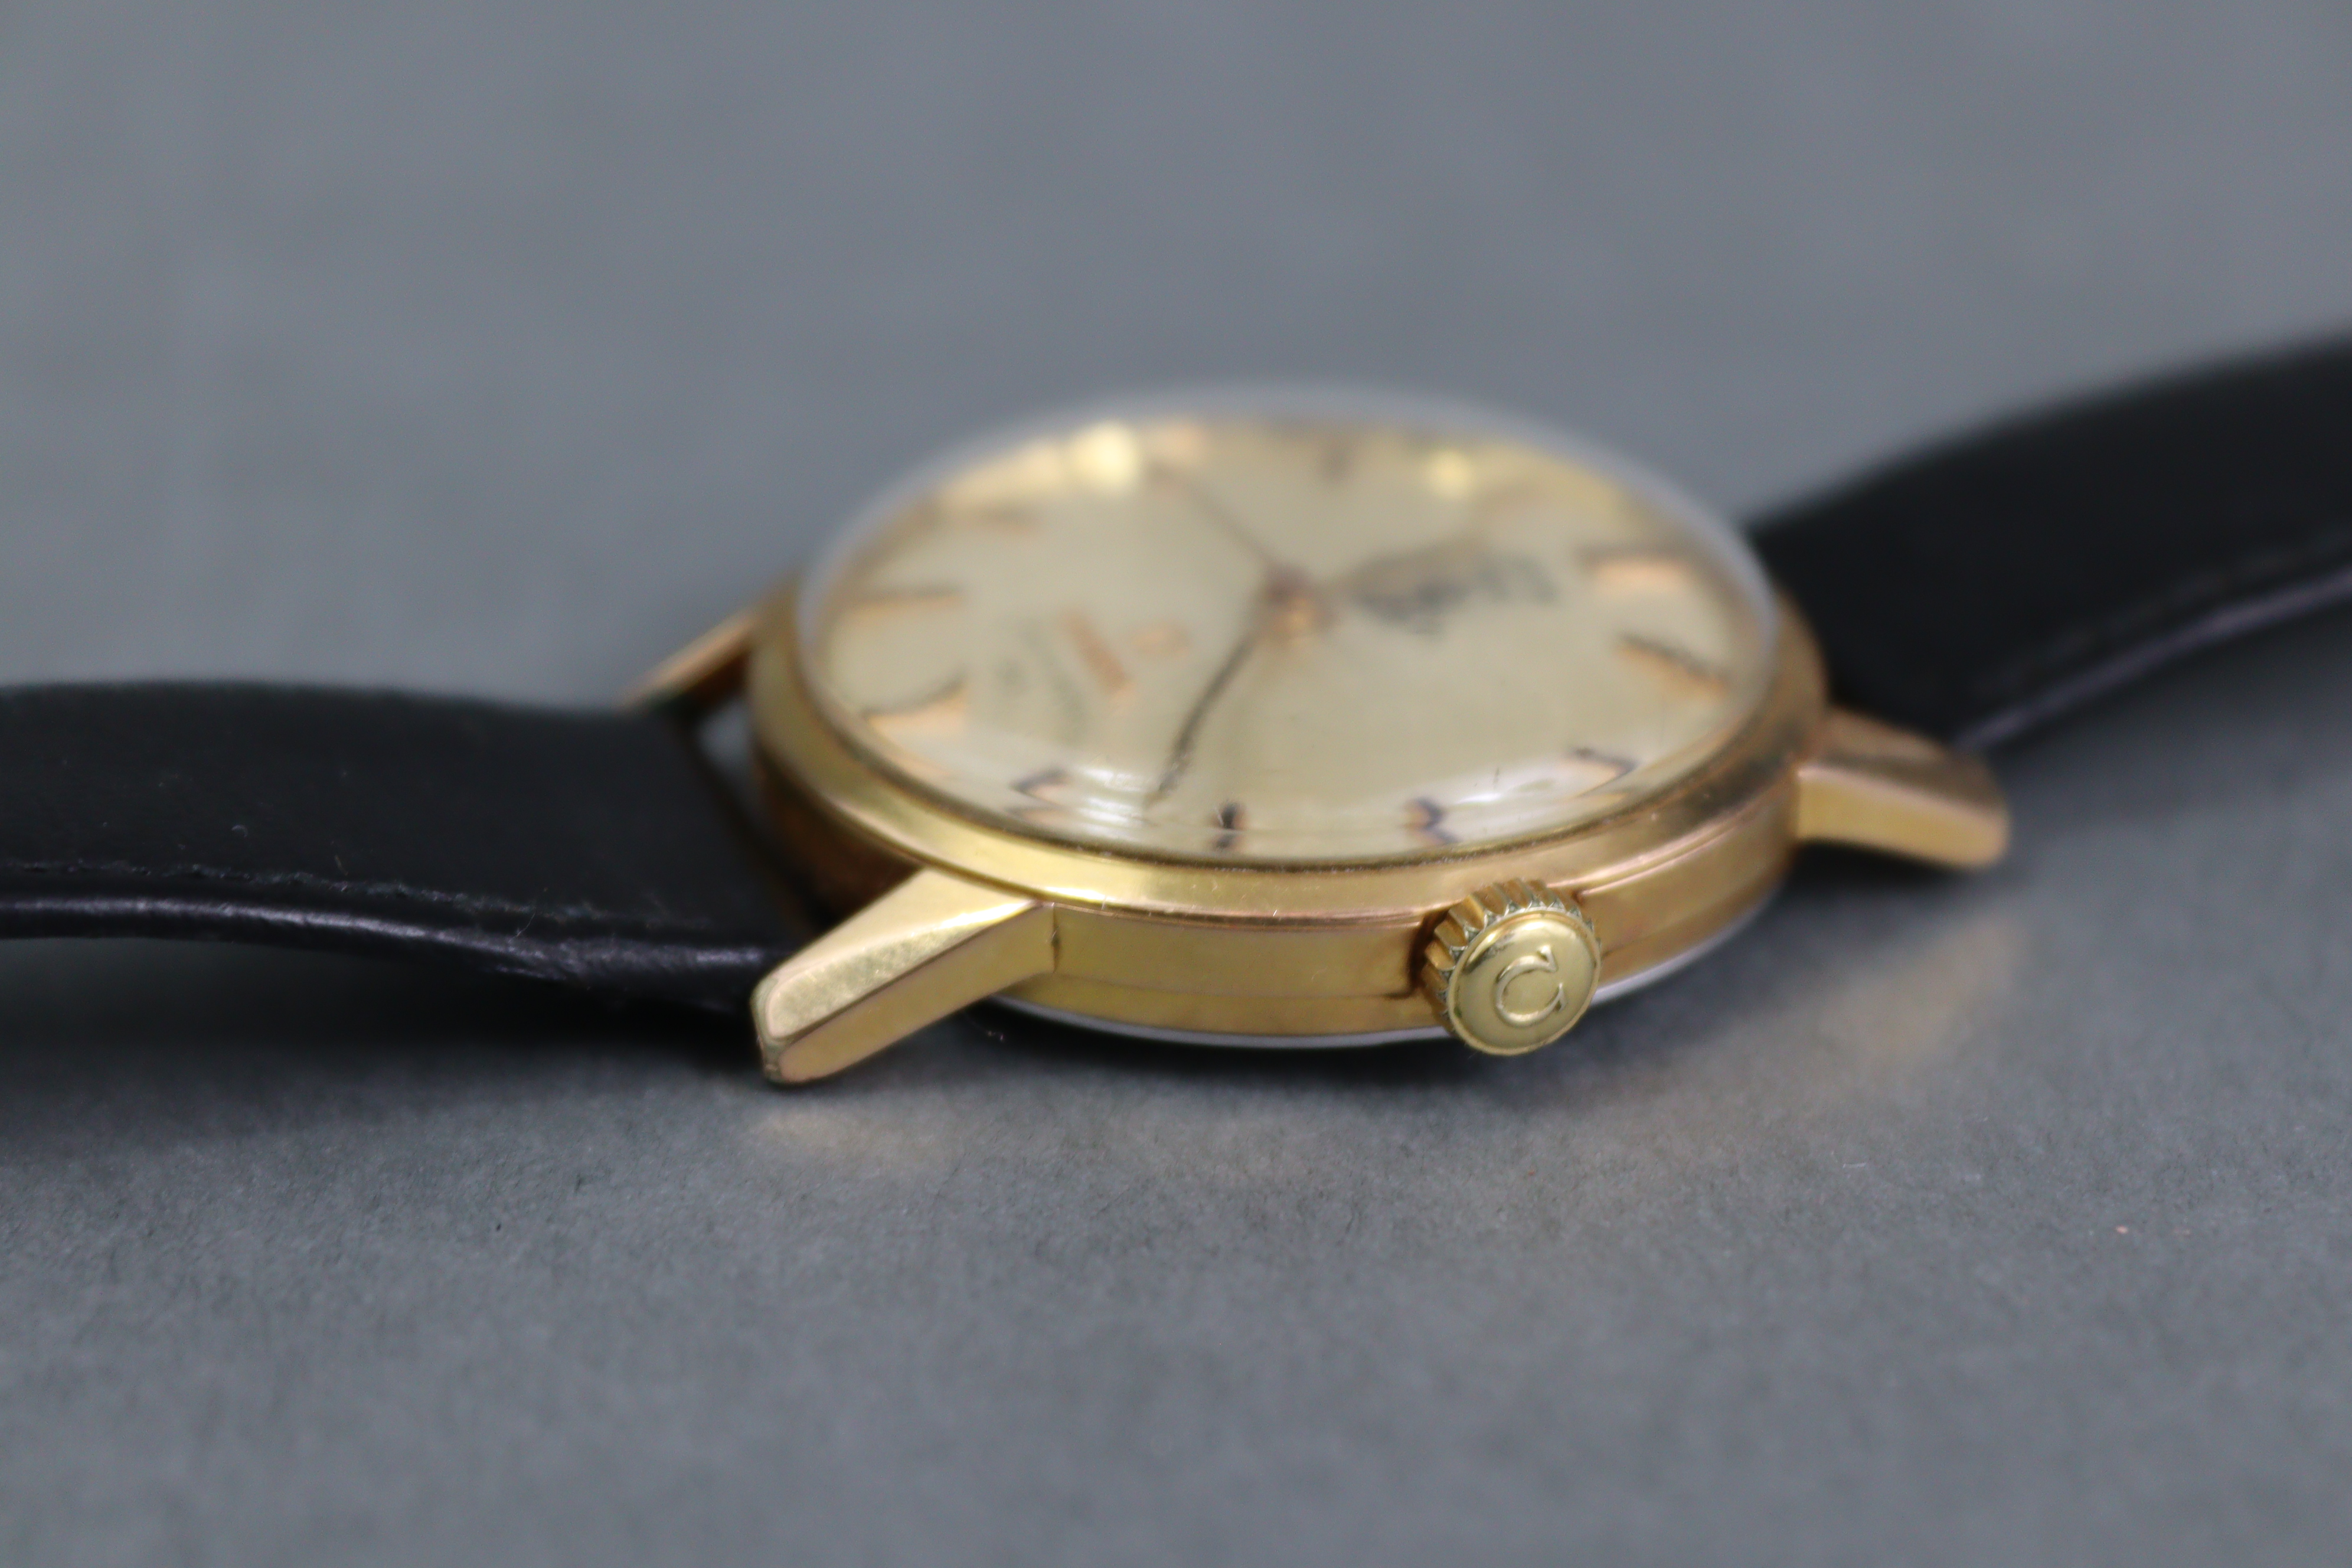 An Omega Seamaster gent’s wristwatch, the champagne dial with portrait of Sheik Essa Bin Sulman Al- - Image 3 of 7